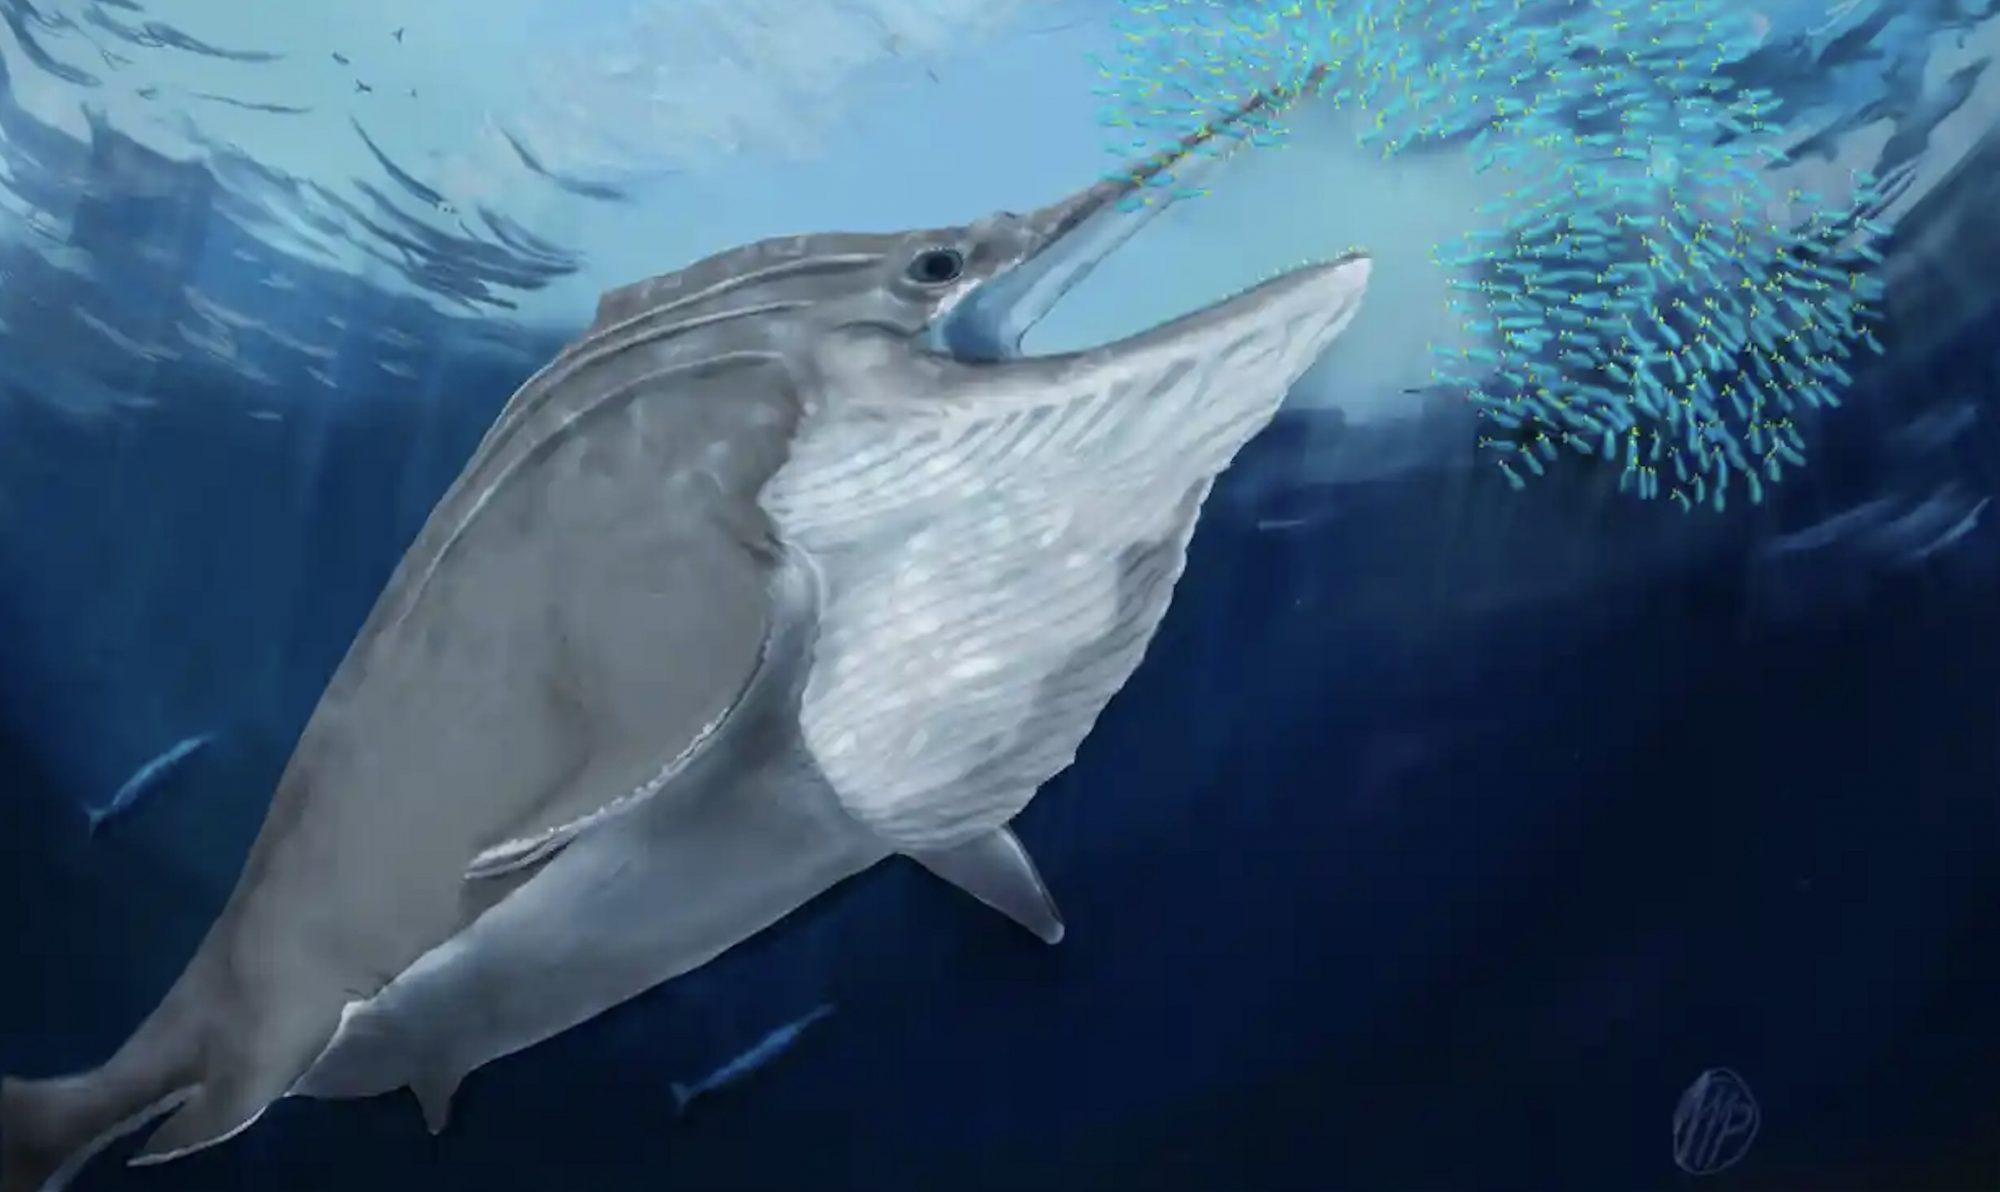 New ichthyosaur fossil said to be largest animal ever found